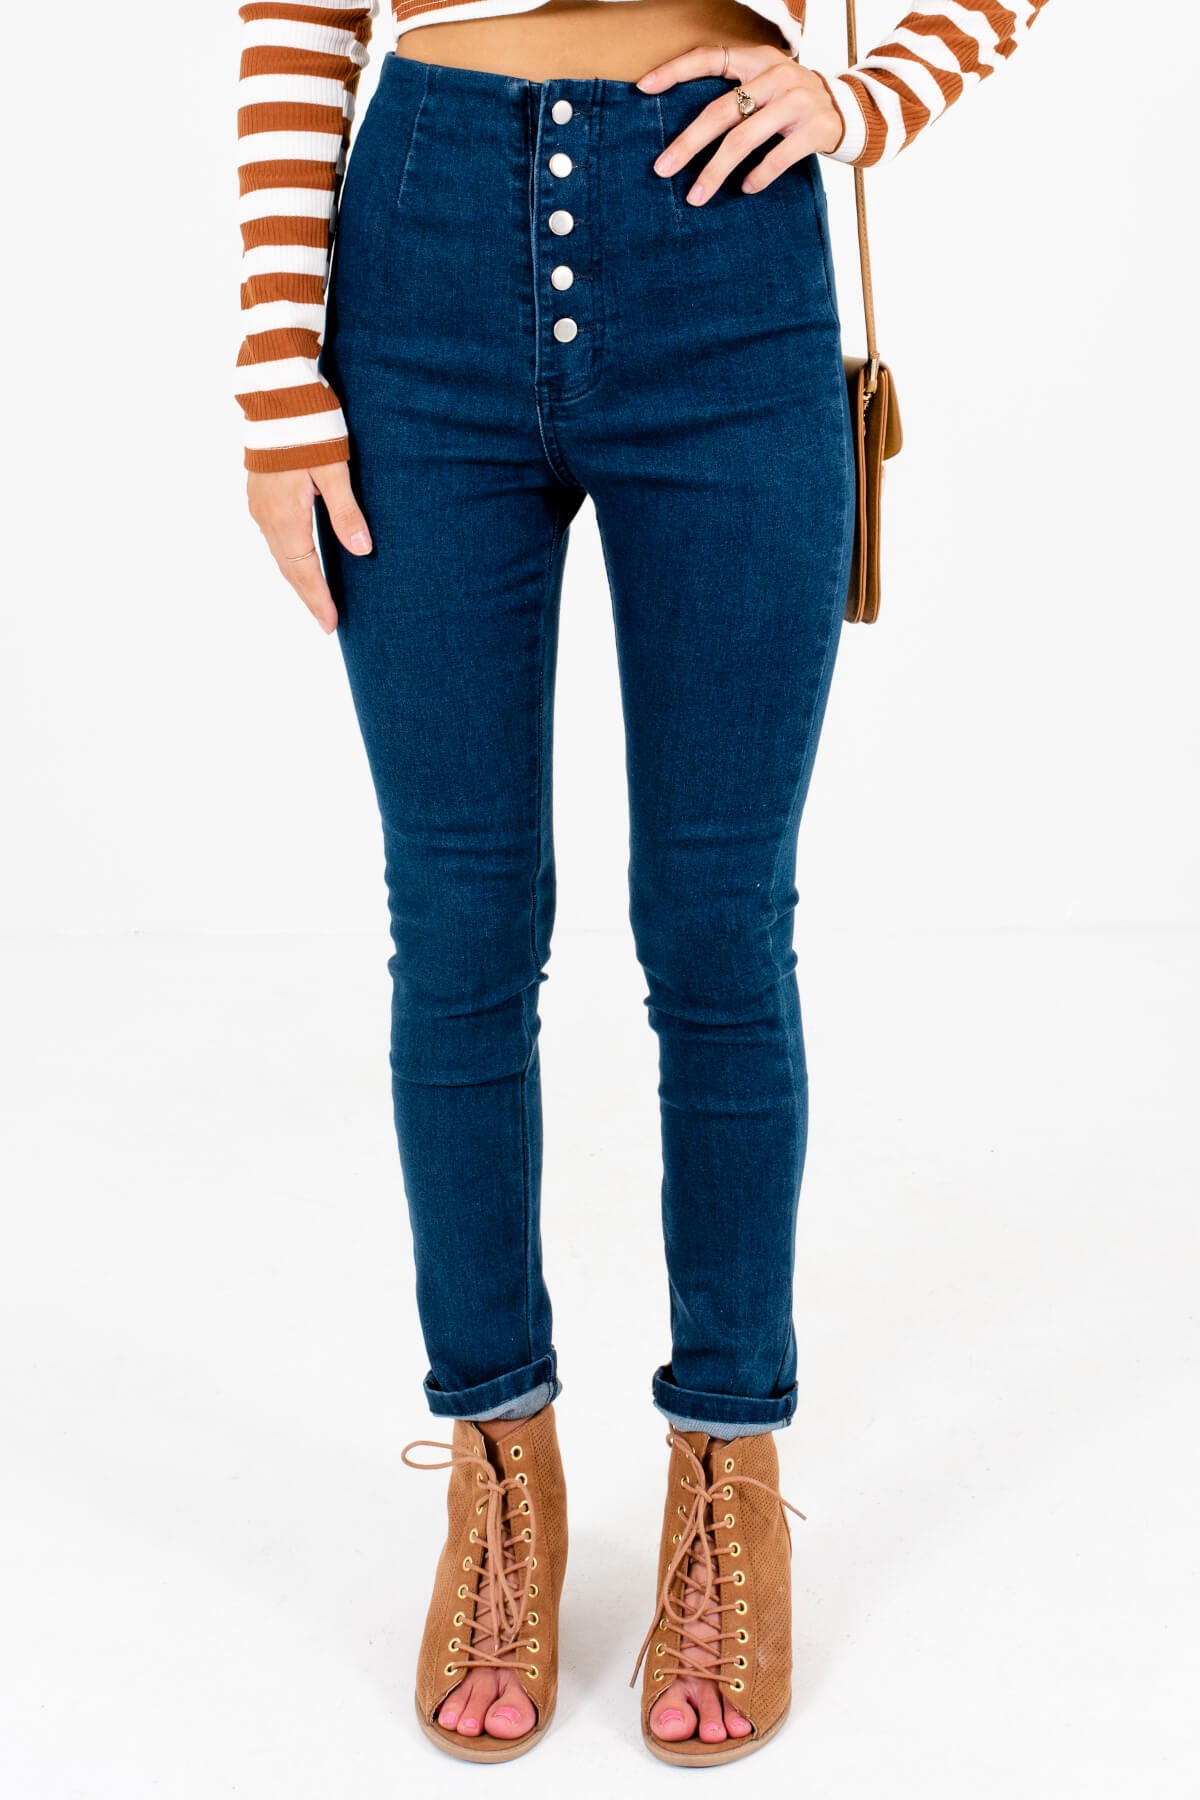 Dark Wash Blue Button-Up Front Boutique Skinny Jeans for Women